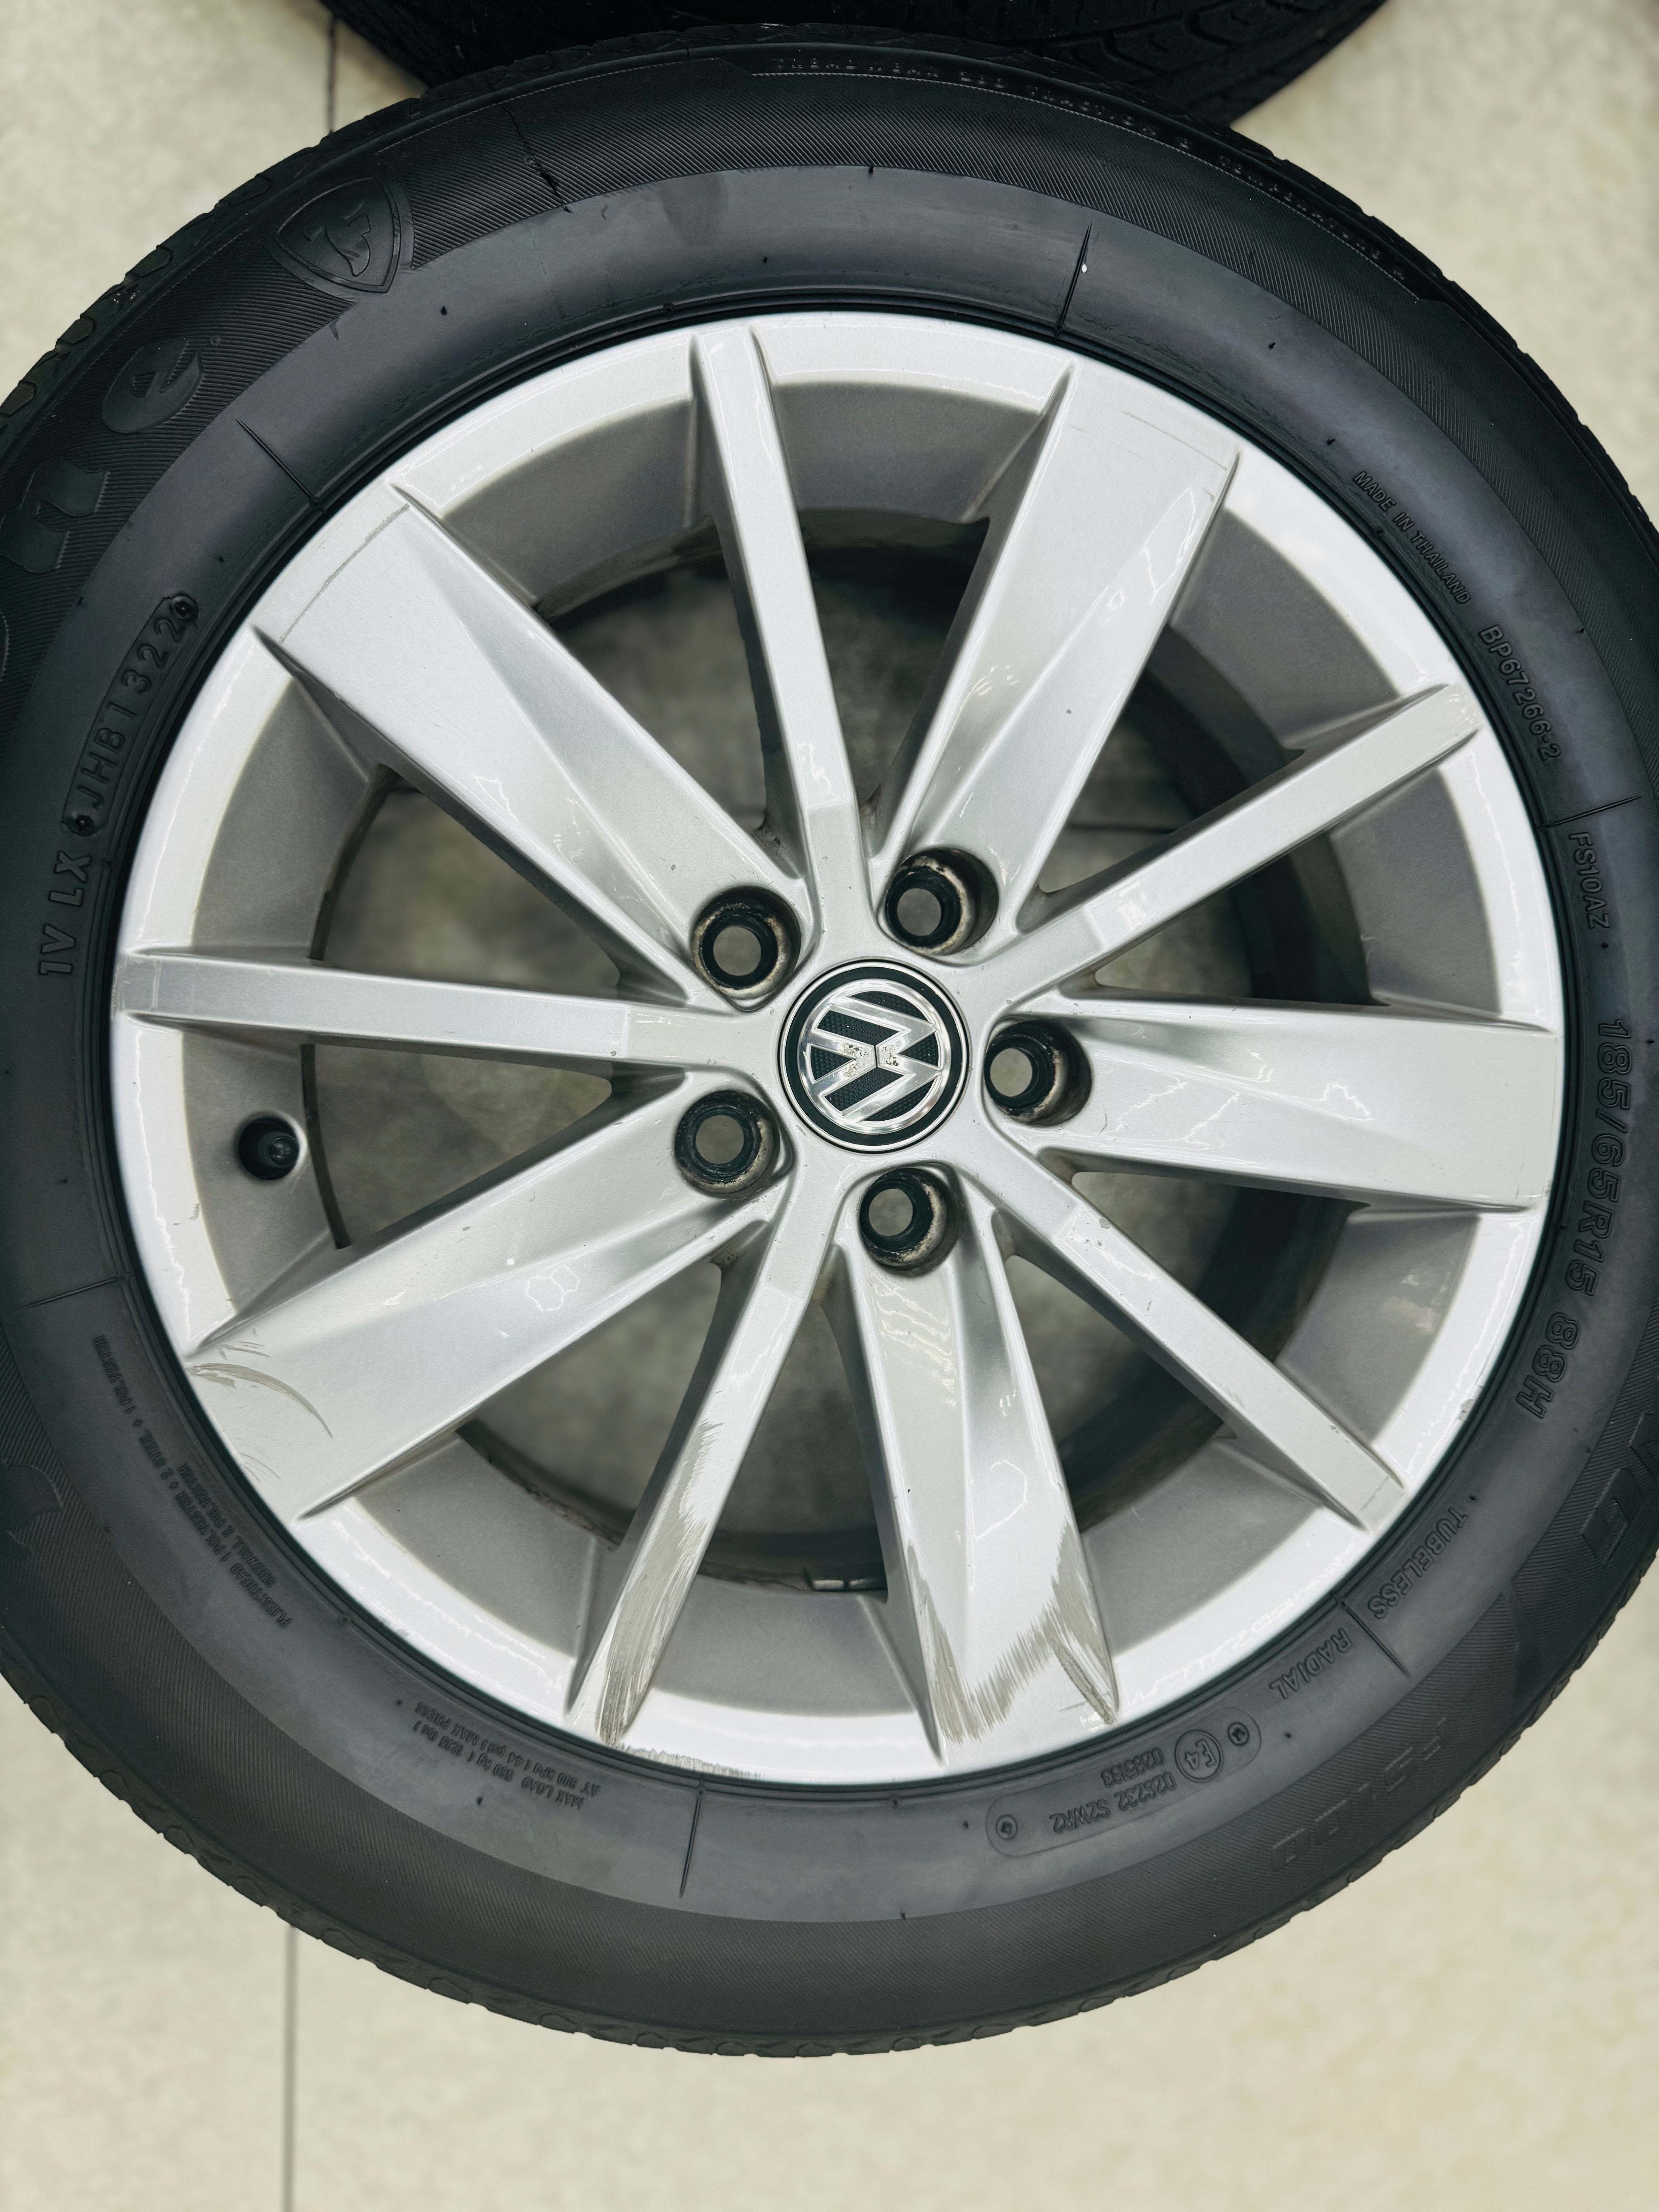 15” POLO 6r OEM  5/100 pre owned mags & tyres